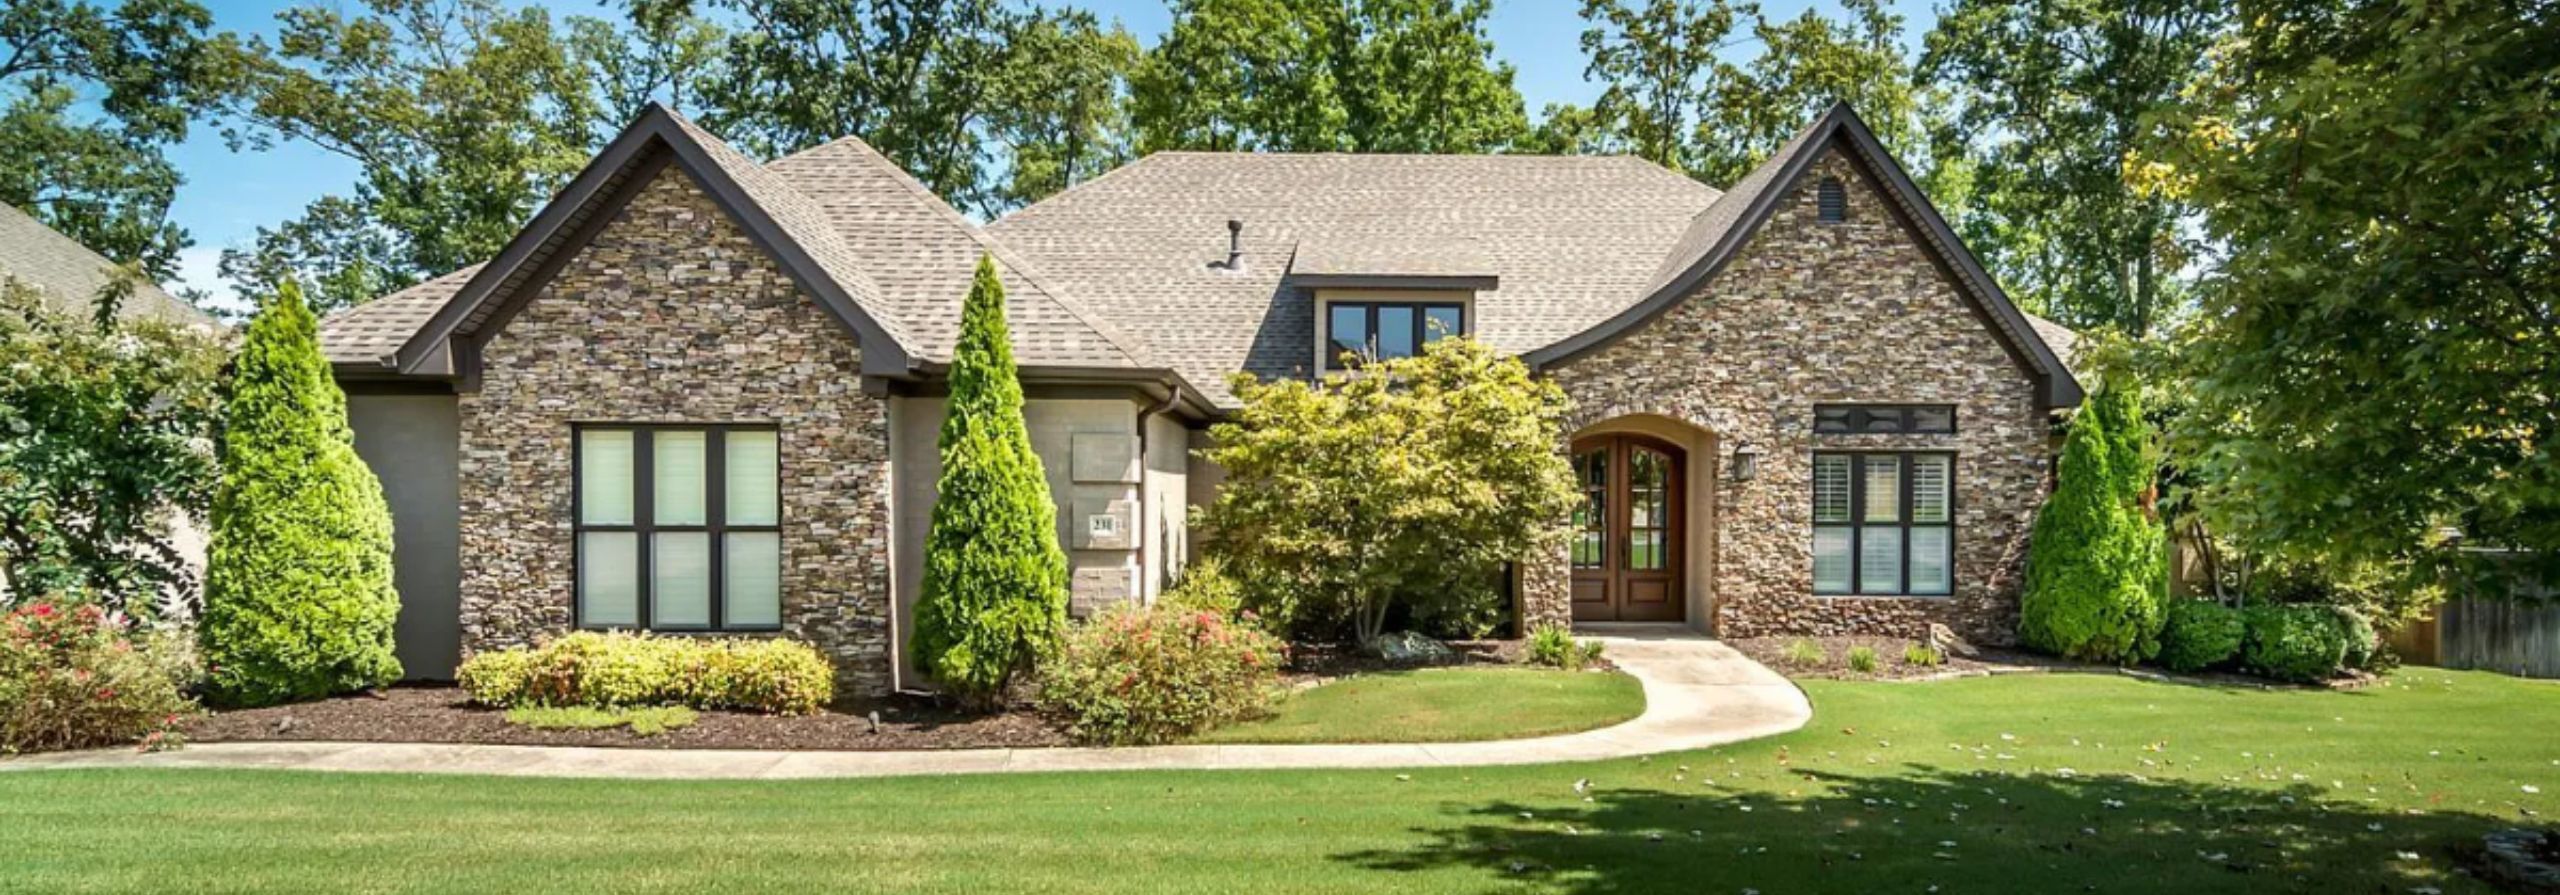 Gorgeous brown family home with a manicured lawn and winding entry way path